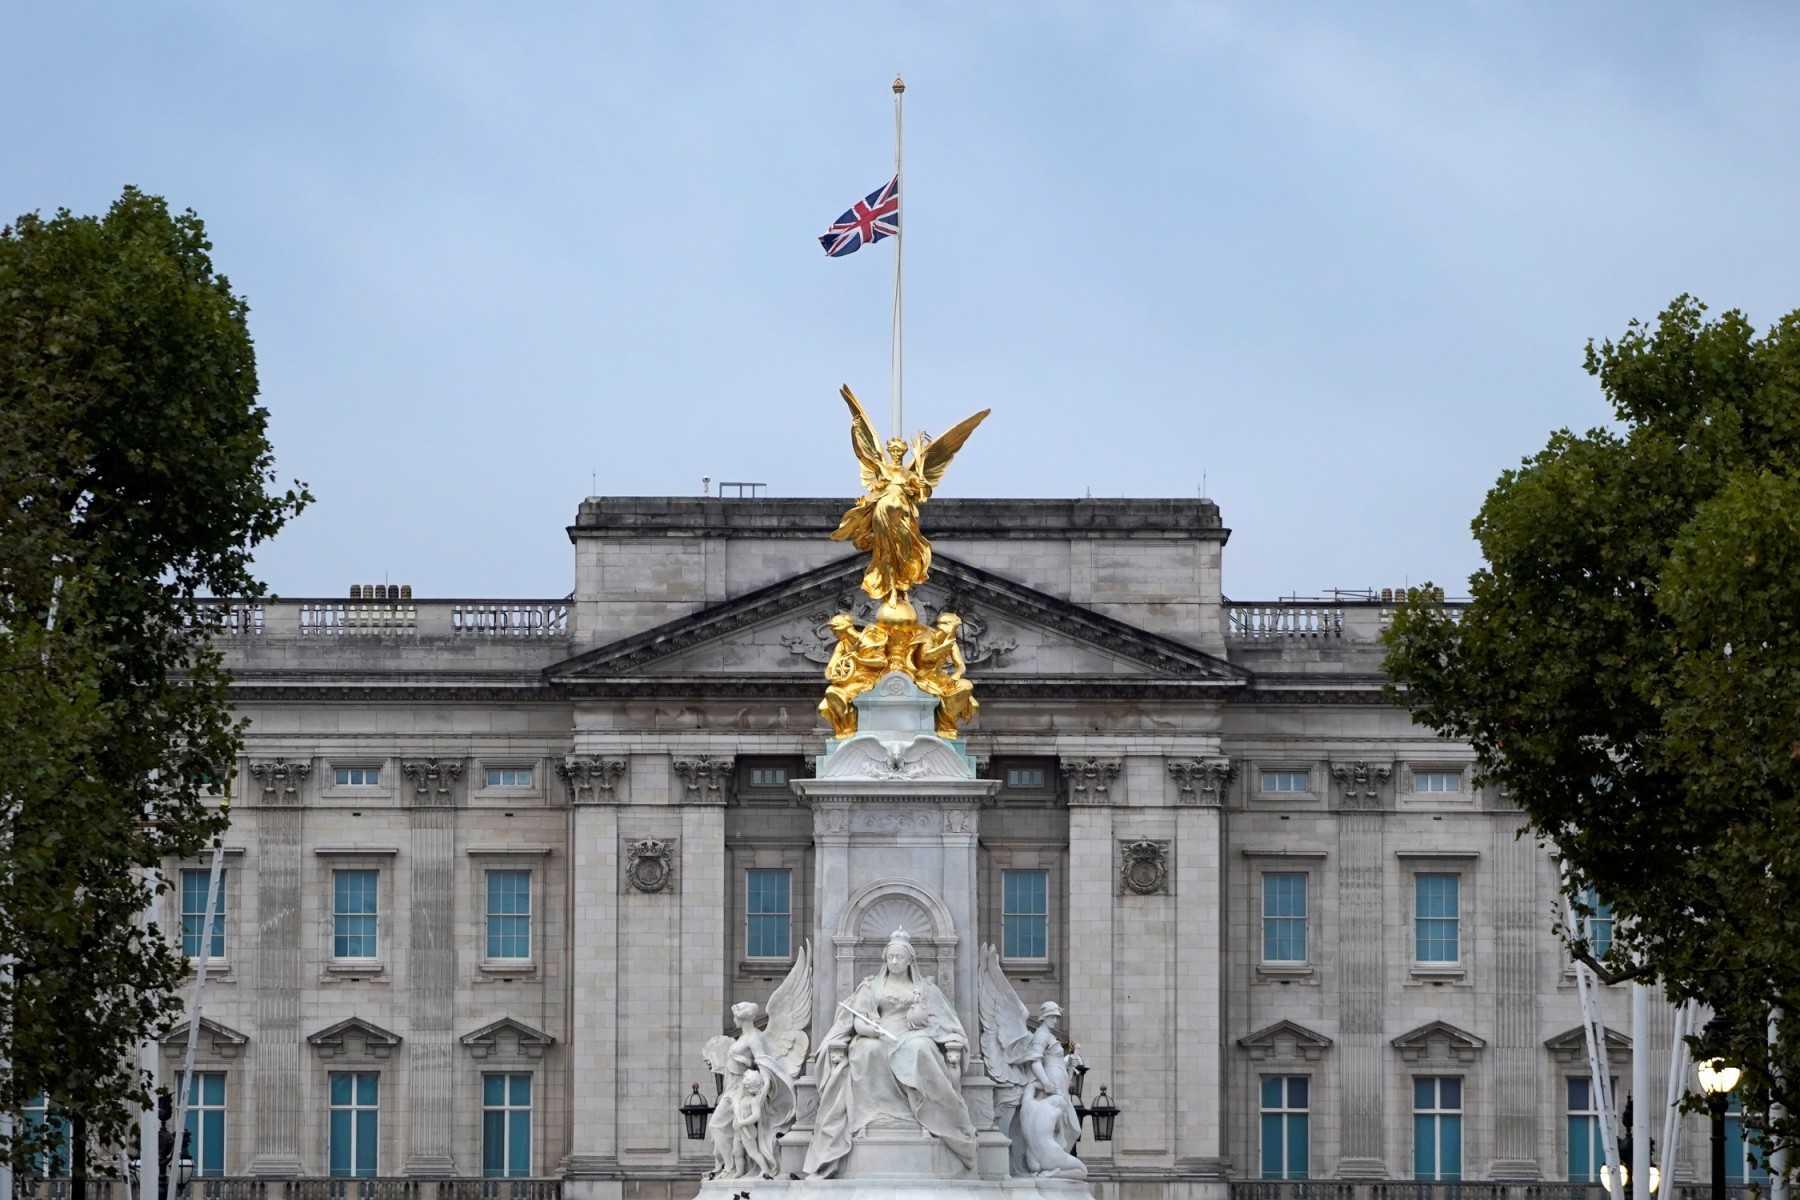 The Union flag flies at half-mast atop Buckingham Palace, beyond the Queen Victoria Memorial statue, in London on Sept 9, a day after Queen Elizabeth II died at the age of 96. Photo: AFP 